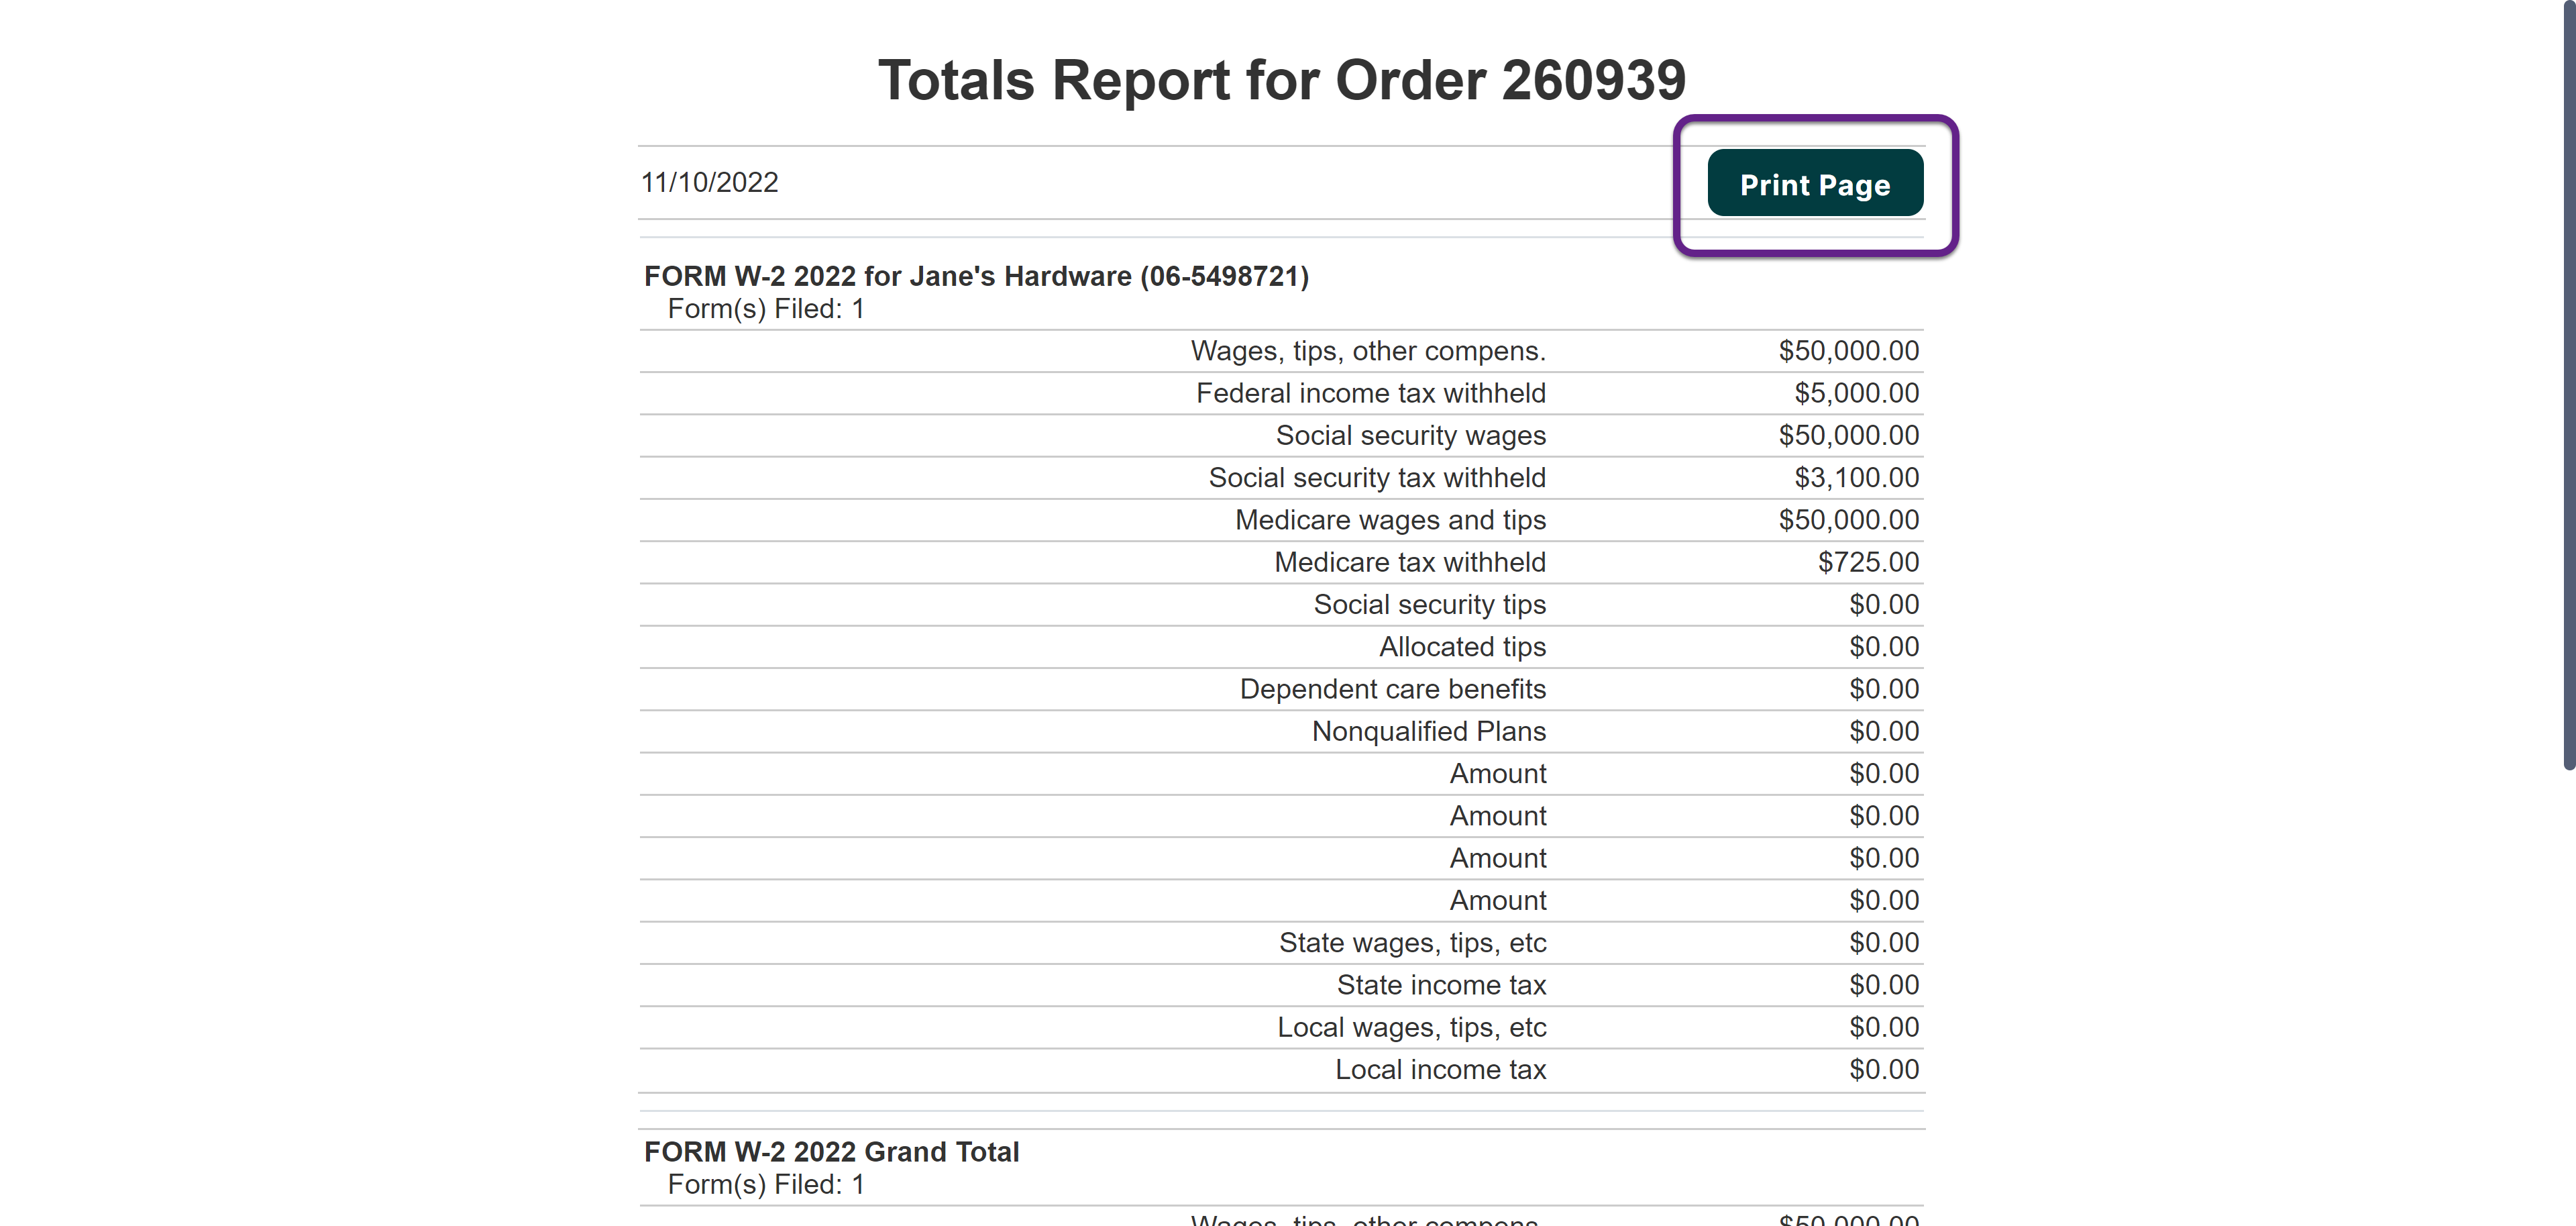 Image of a Totals Report form with a callout on the Print Page button.